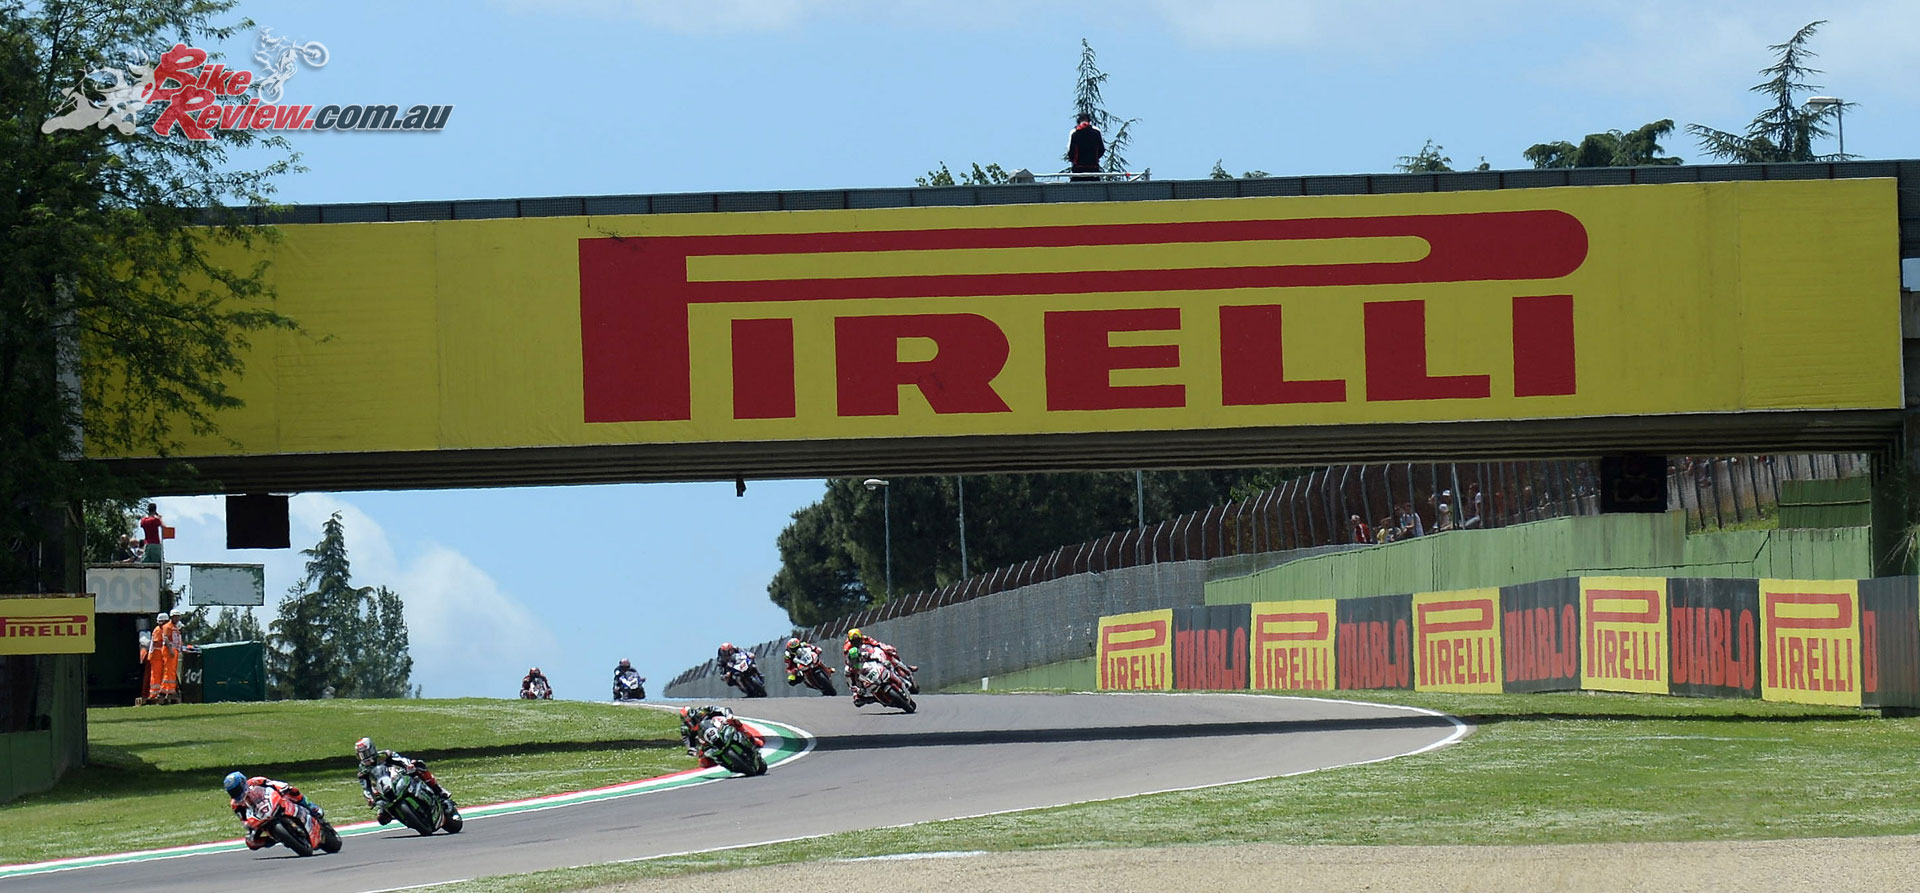 Pirelli to be official tyre supplier for all classes of WorldSBK for 2019 and 2020